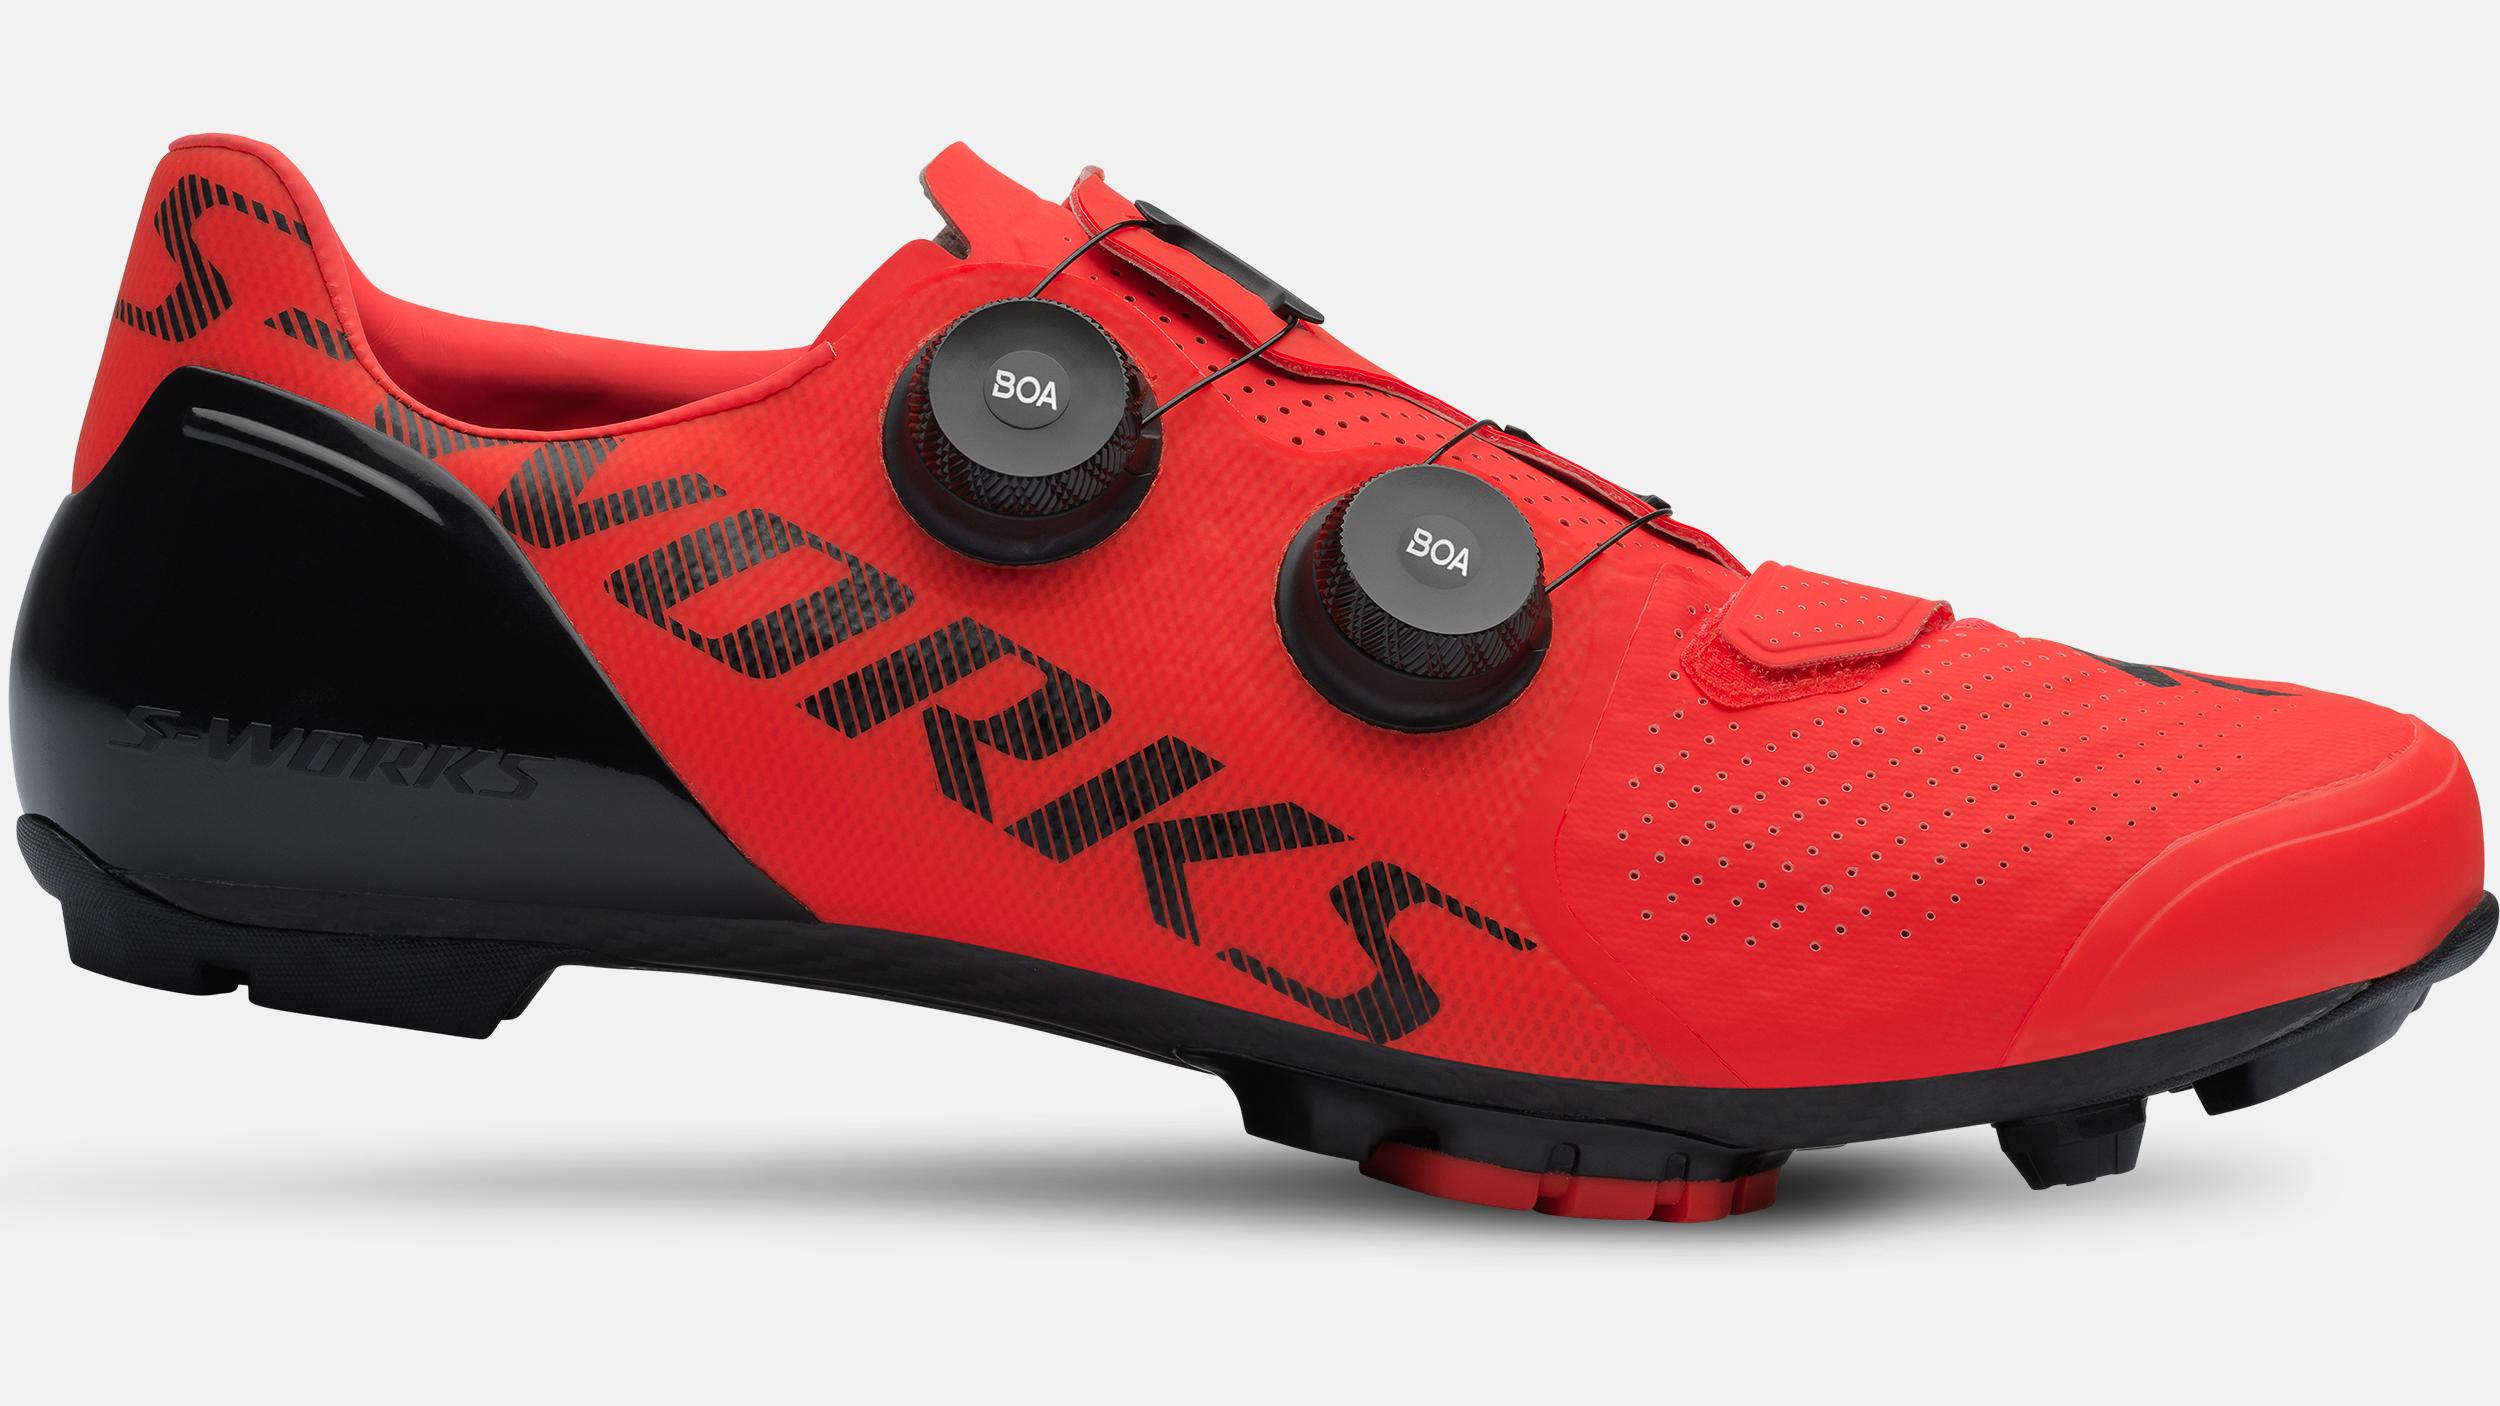 S-Works Recon Bike Shoes | Specialized.com